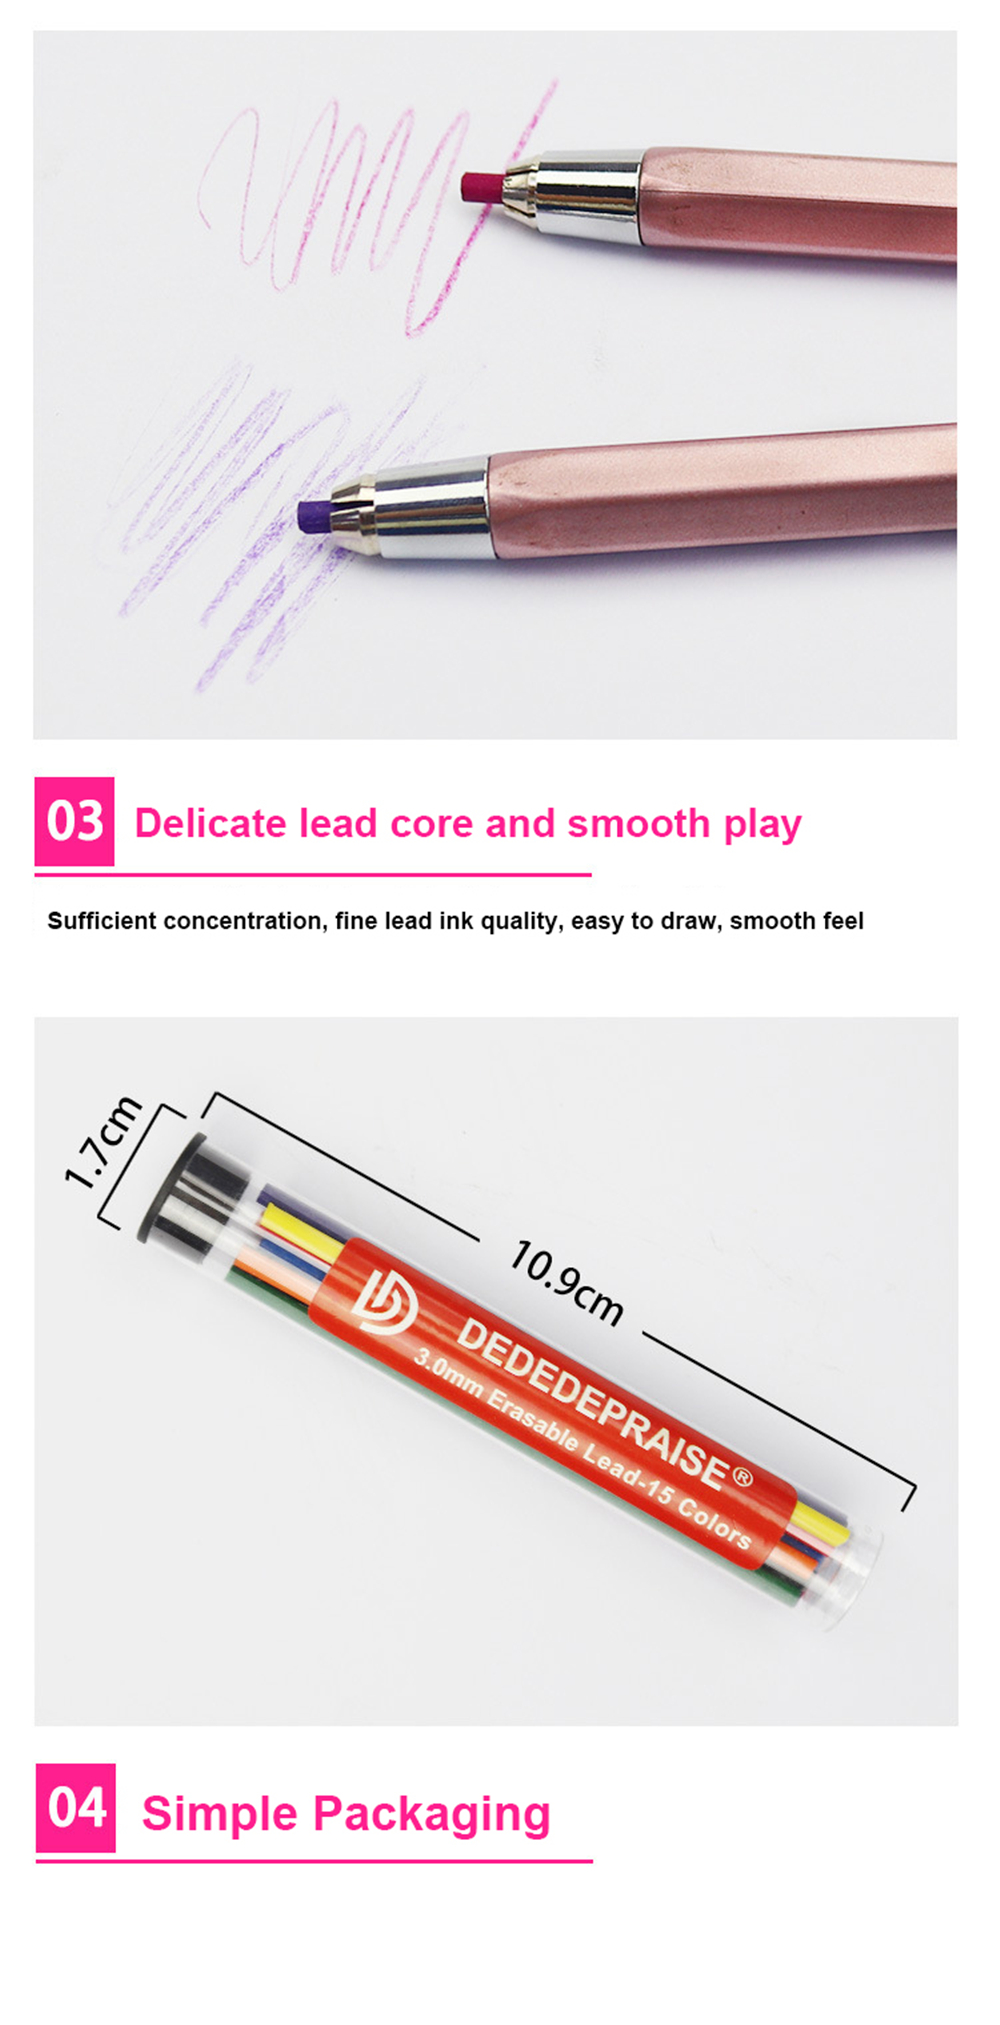 30-MM-Automatic-Pencil-Erasable-Color-Lead-With-Portable-Refill-Sharpener-Art-Drawing-Design-Mechani-1738429-3